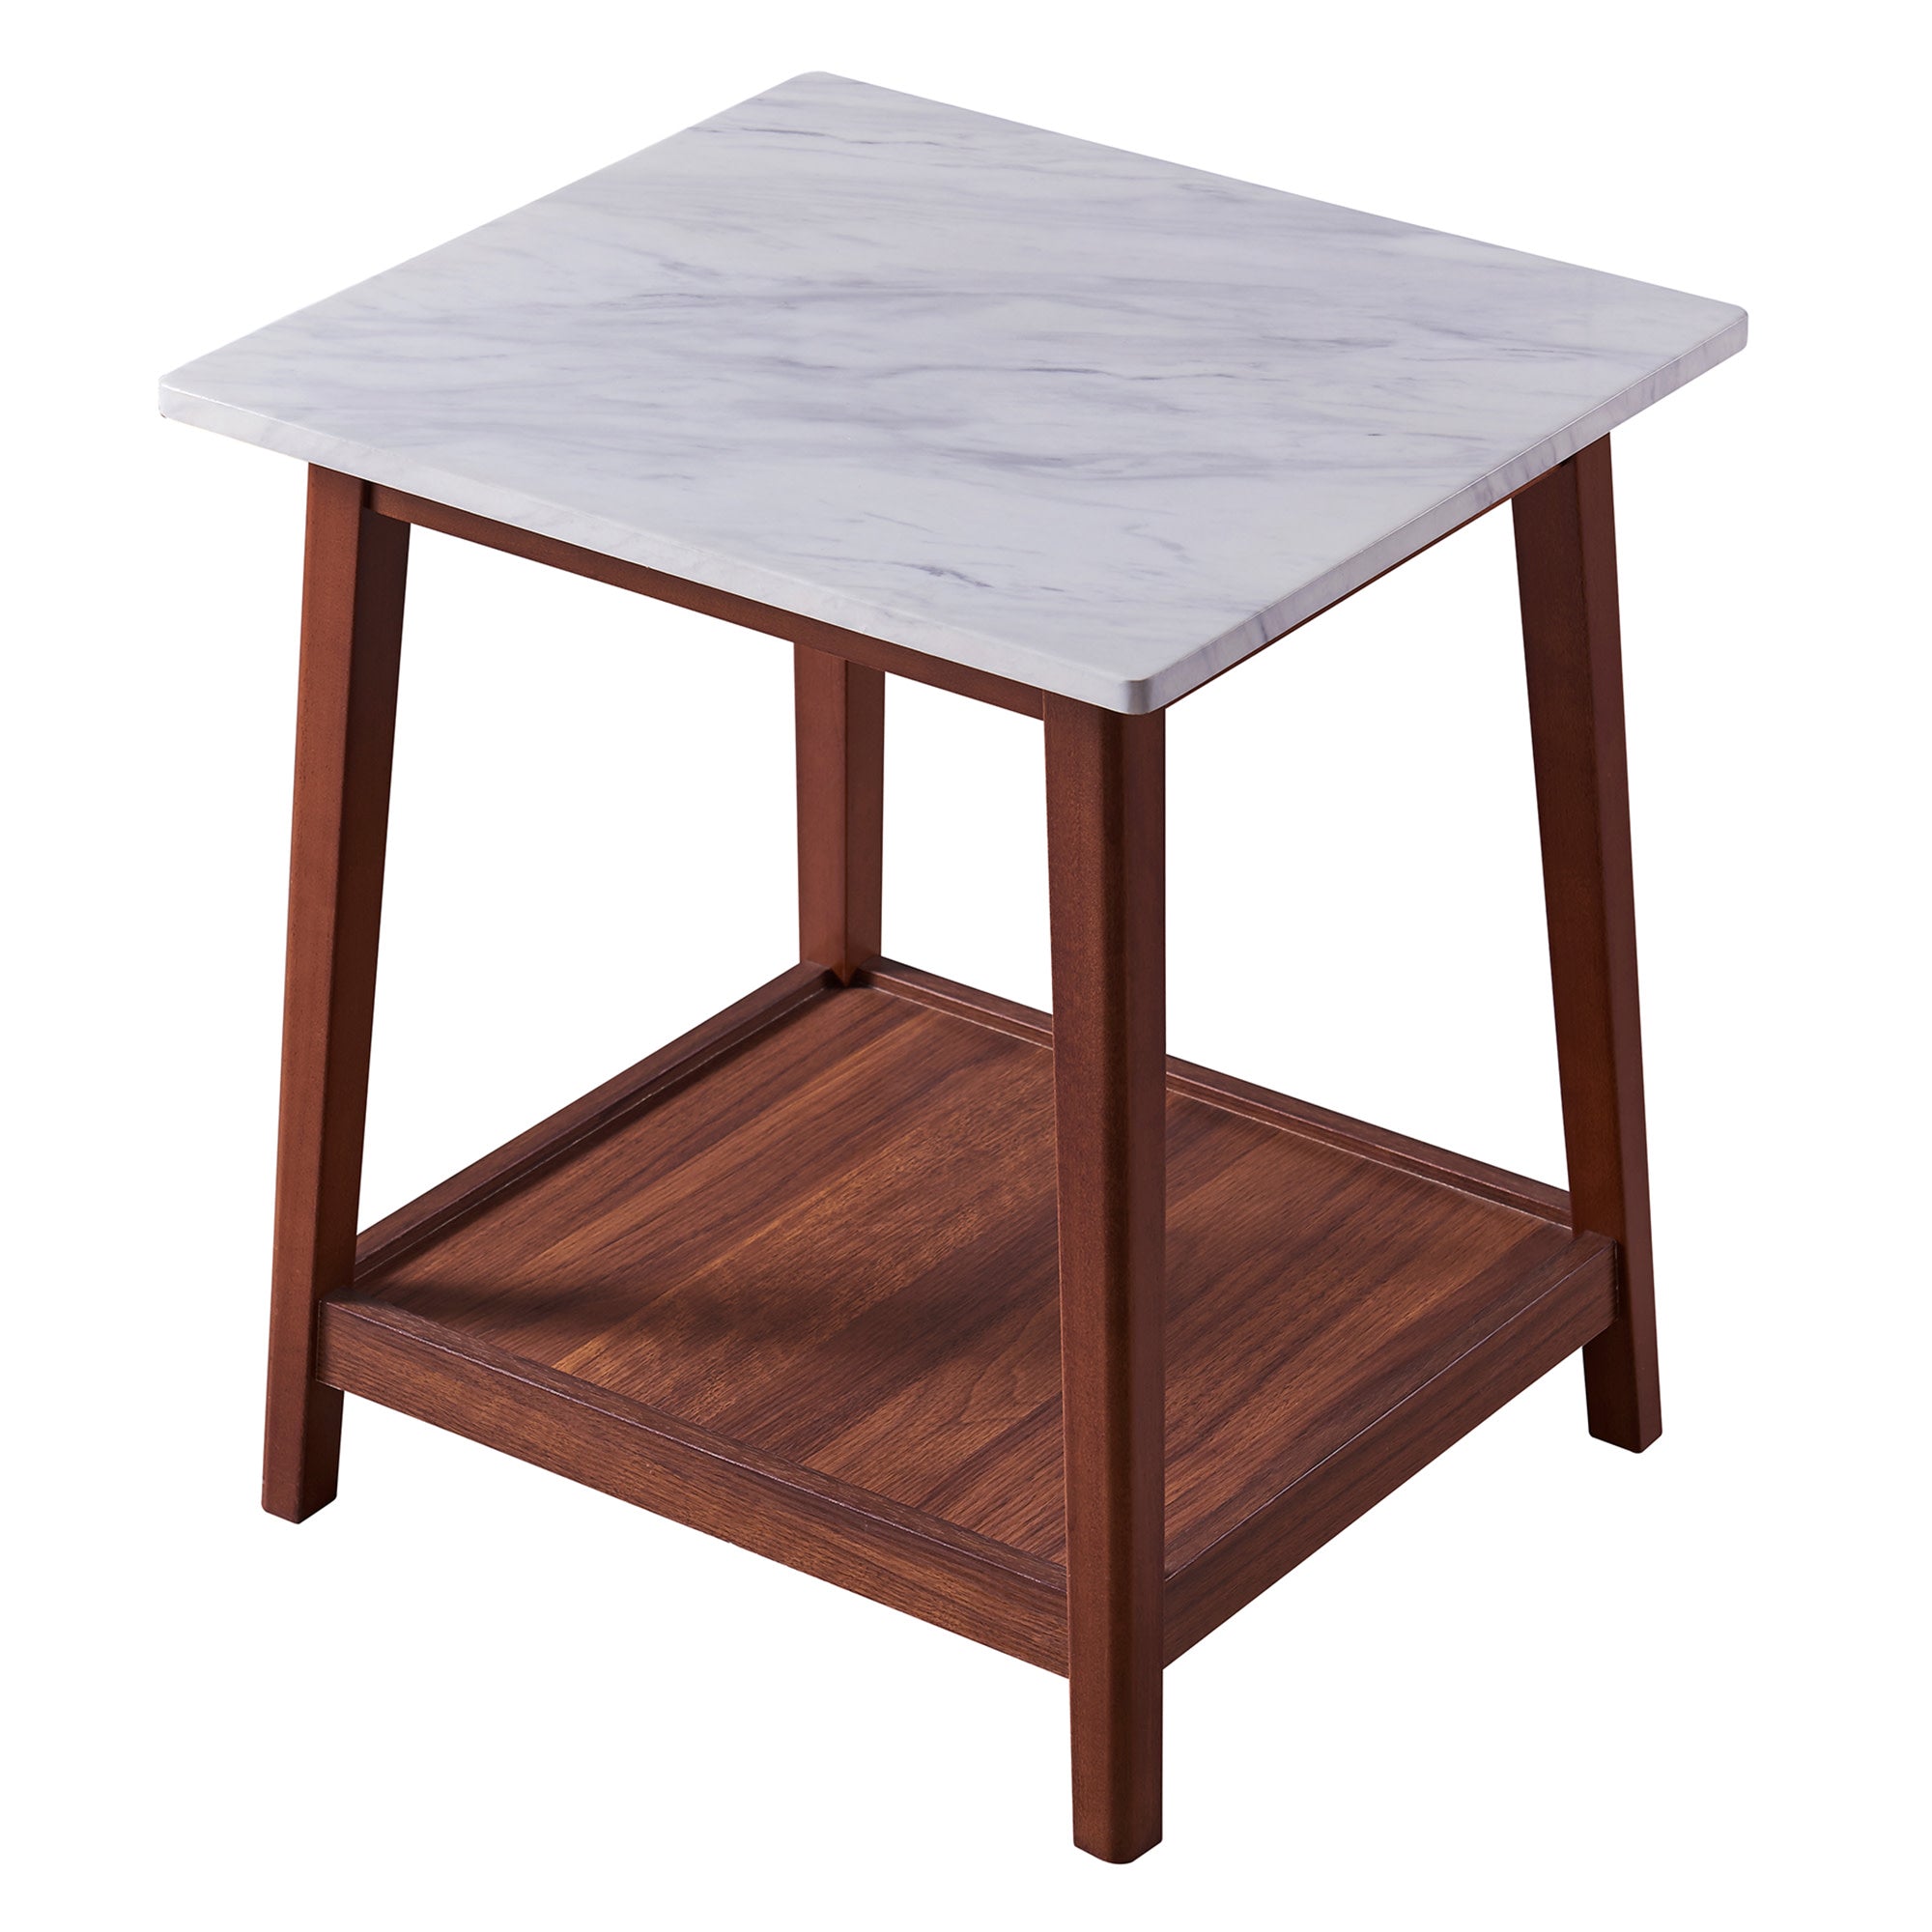 Teamson Home Kingston Wooden Side Table with Square Faux Marble Top & Open Bottom Shelf, White/Walnut